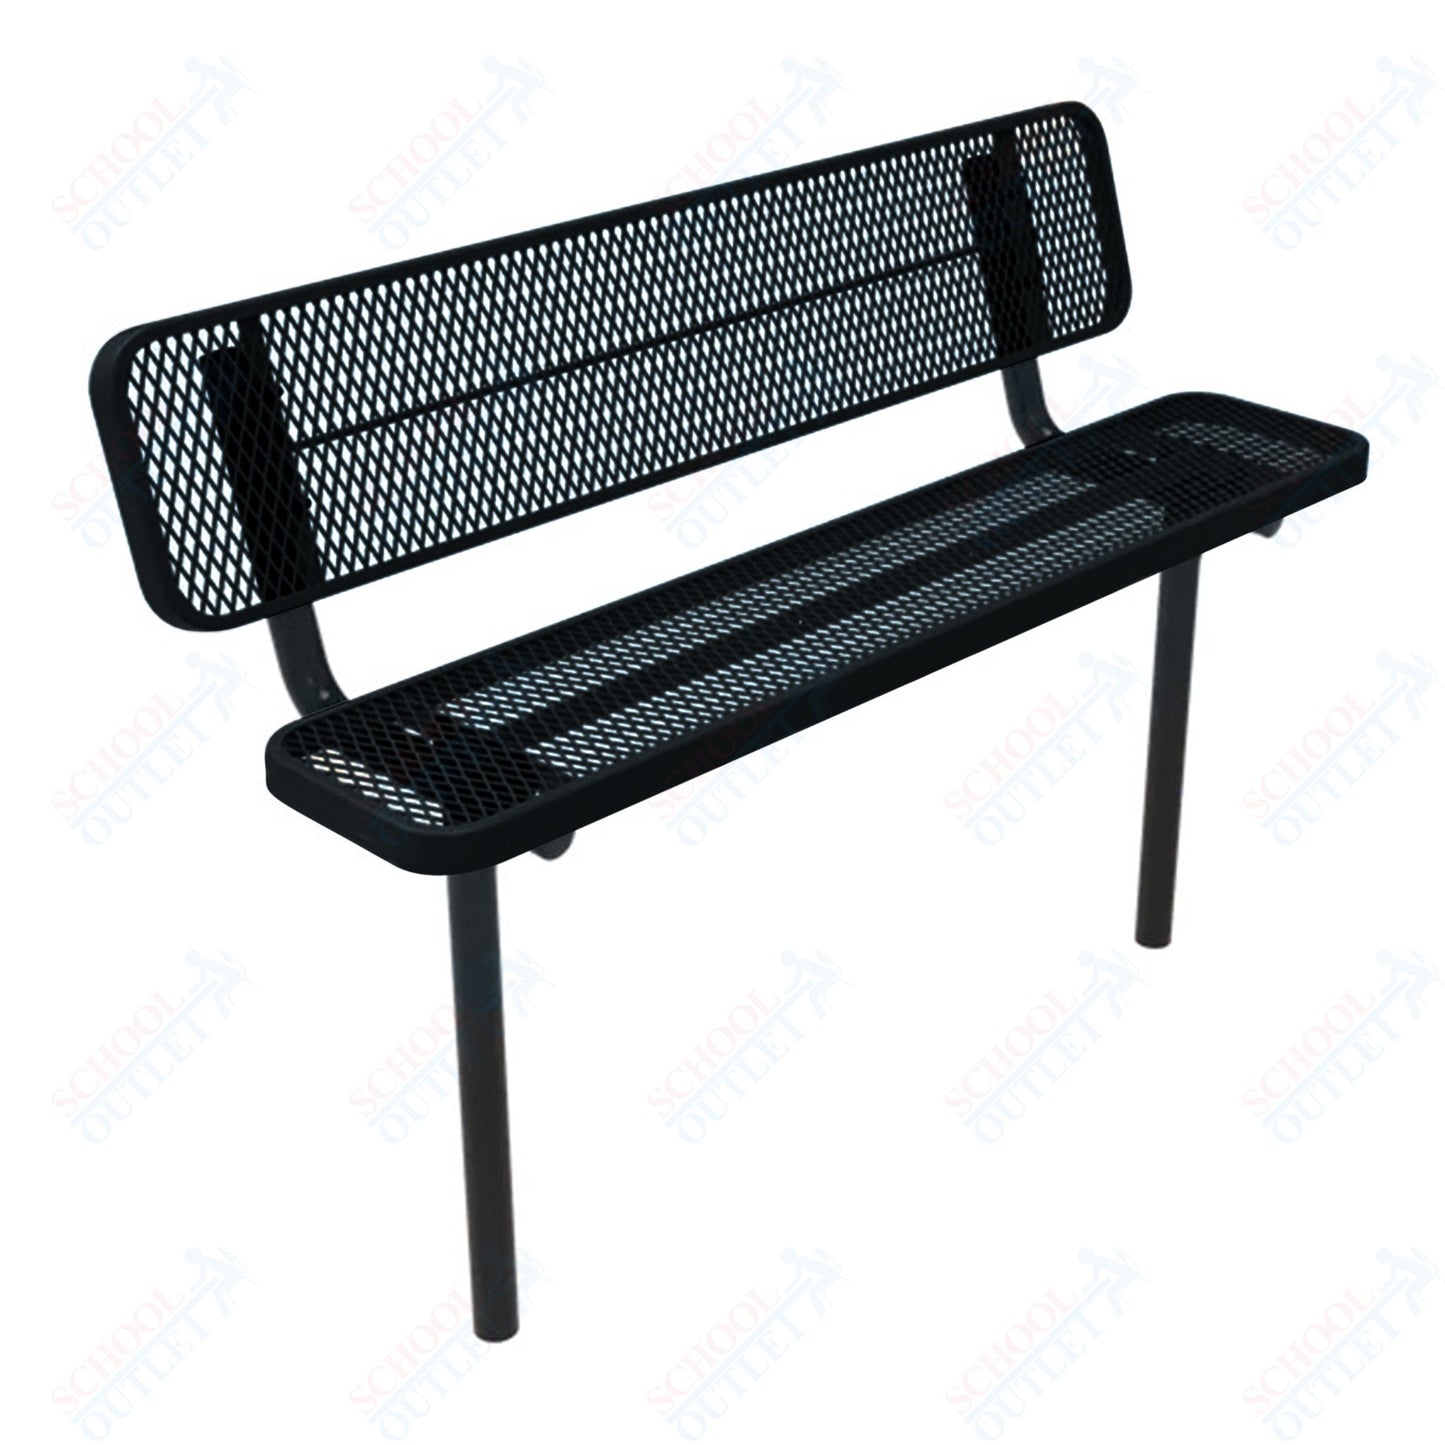 MyTcoat - Player's Outdoor Bench with Back - Inground Mount 4' L (MYT-BPY04-31)